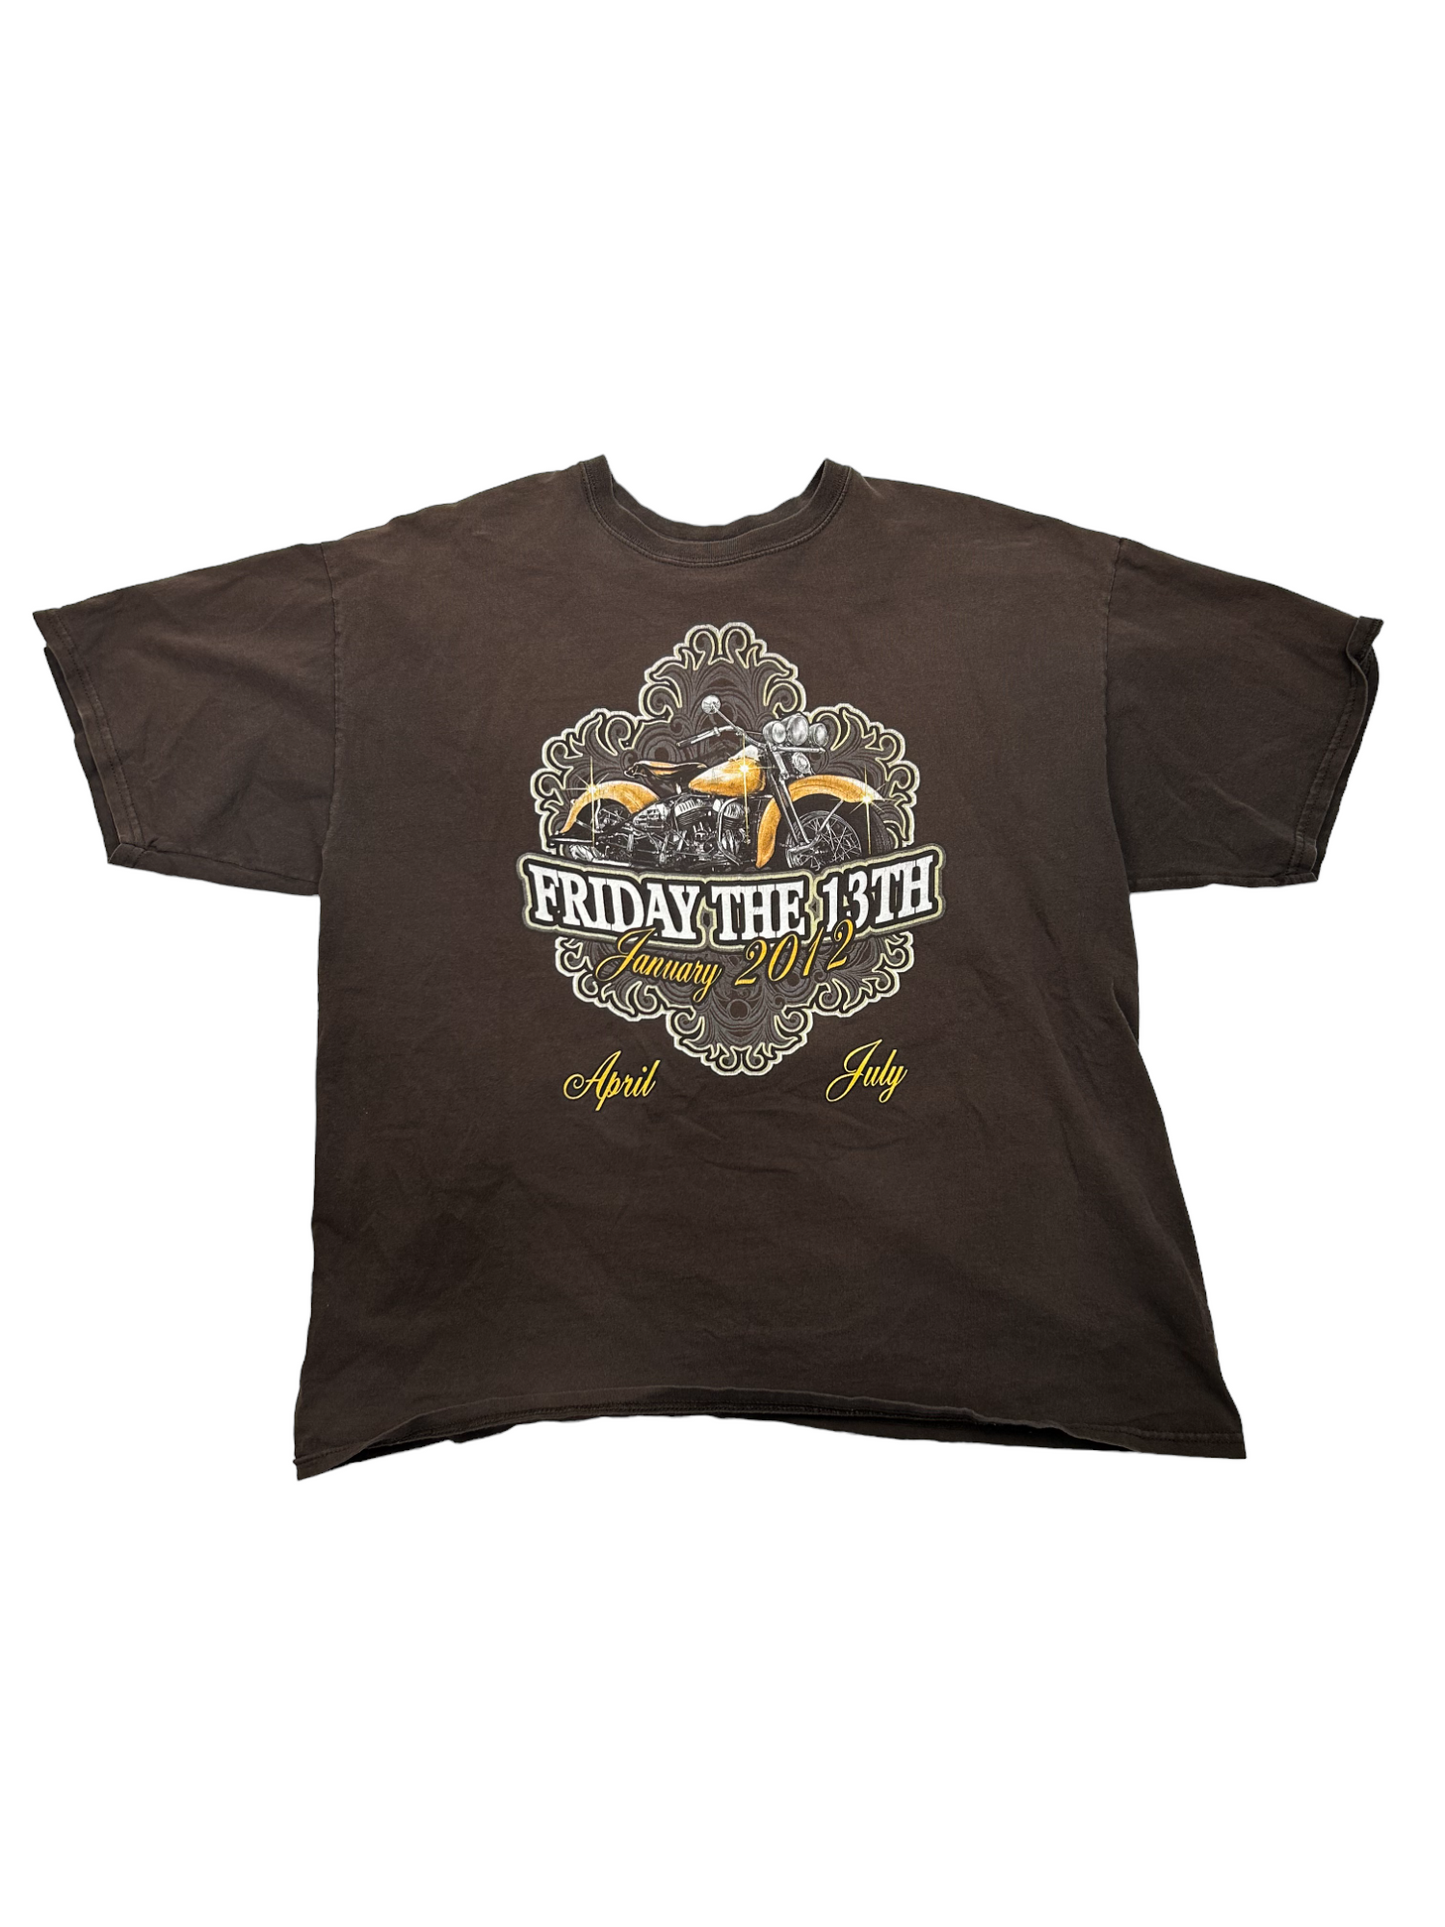 Friday the 13th 2012 T-Shirt